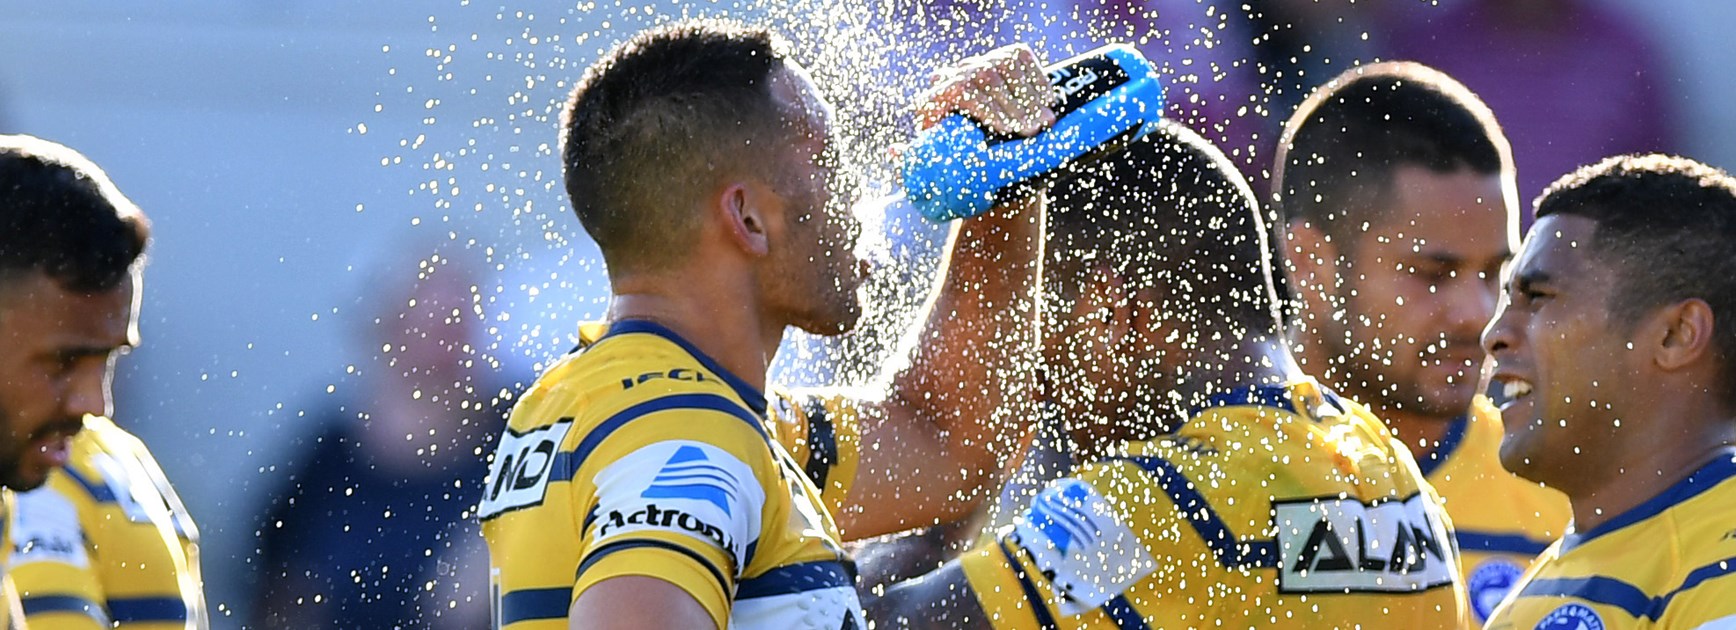 Parramatta Eels players during their 54-0 loss to Manly.